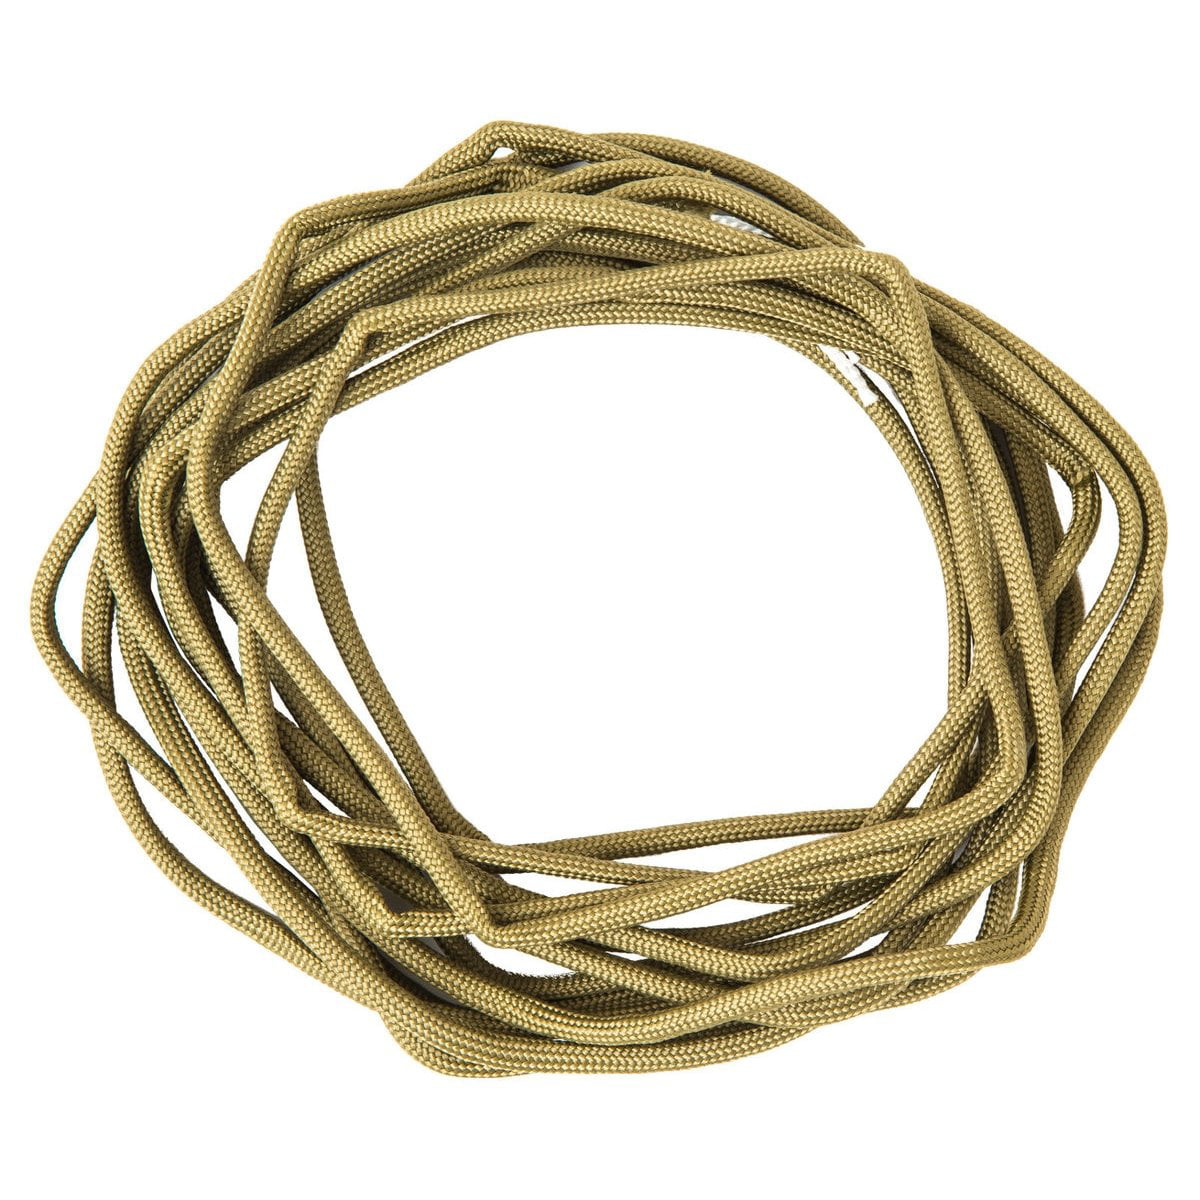 Beige Paracord 1000 Foot 550 lb 7 Strand Bracelet Camping Survival Kit Rope Cord 